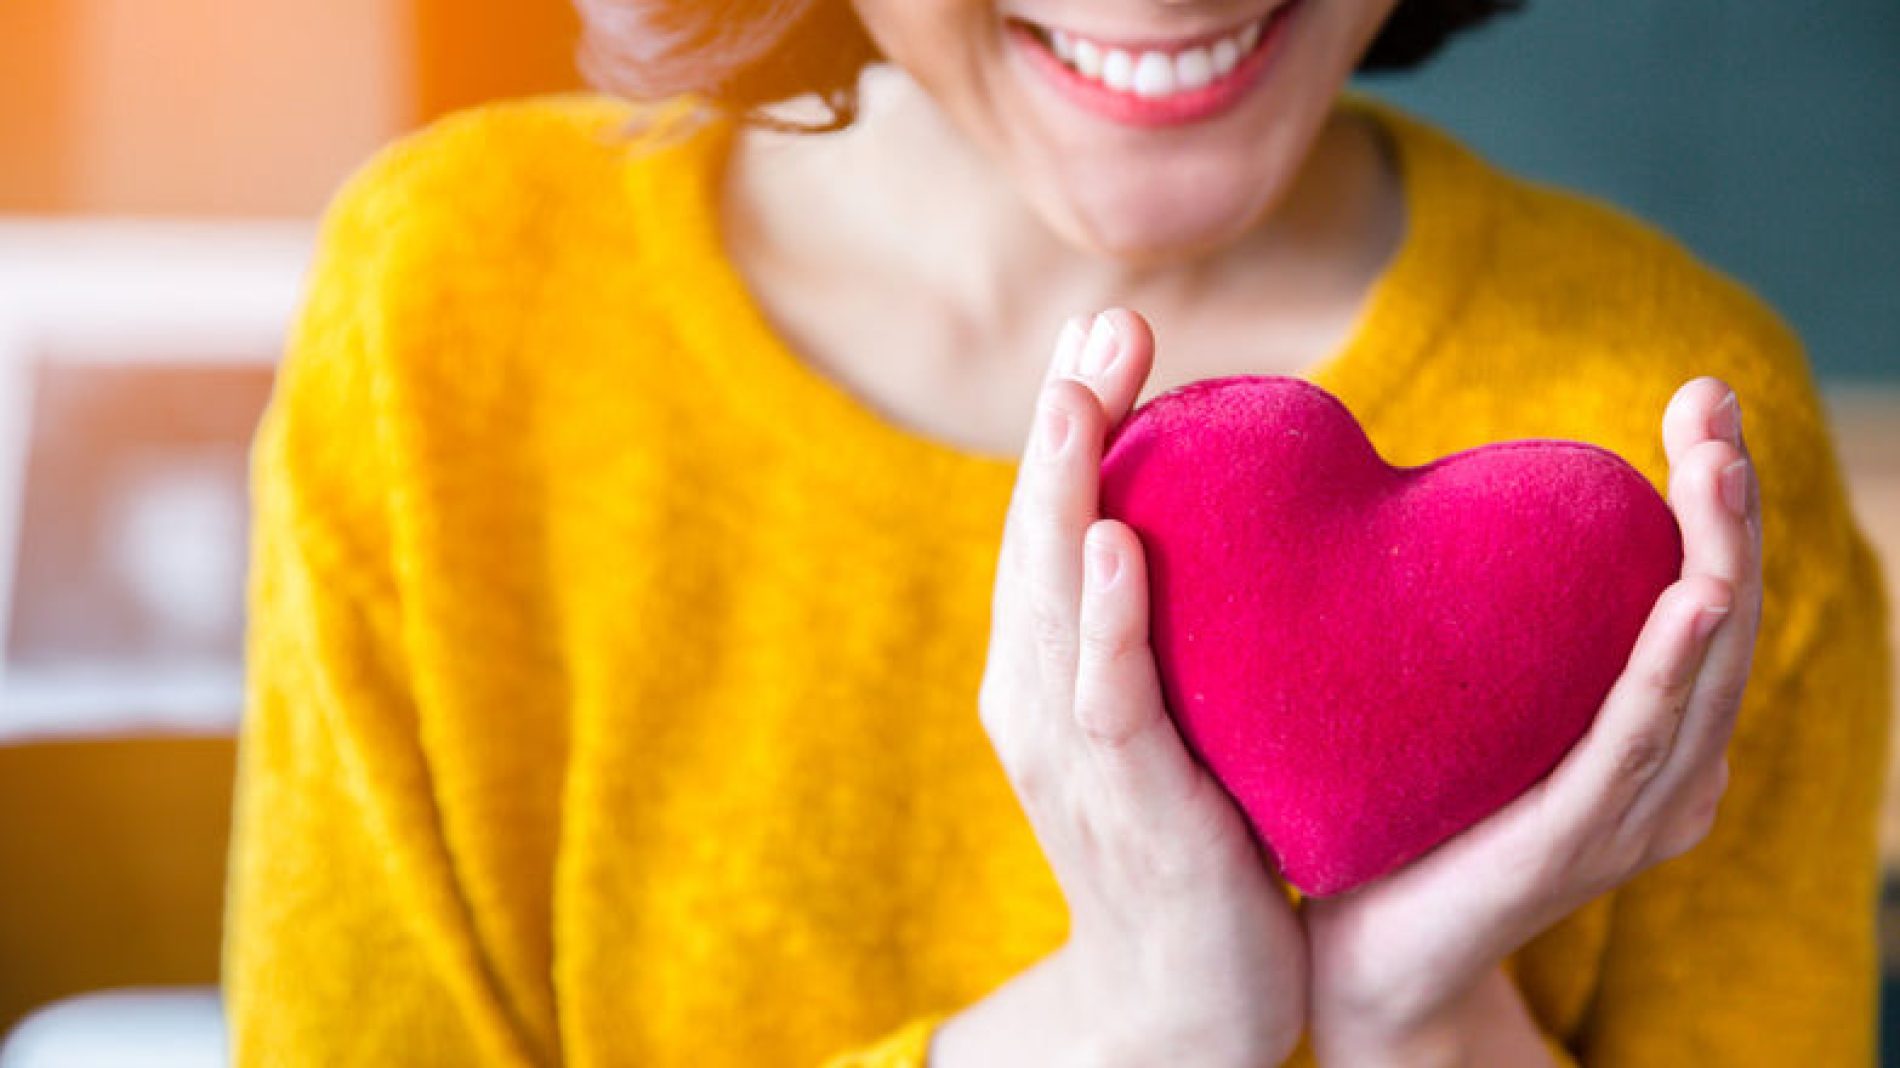 Woman-smiling-and-holding-toy-heart